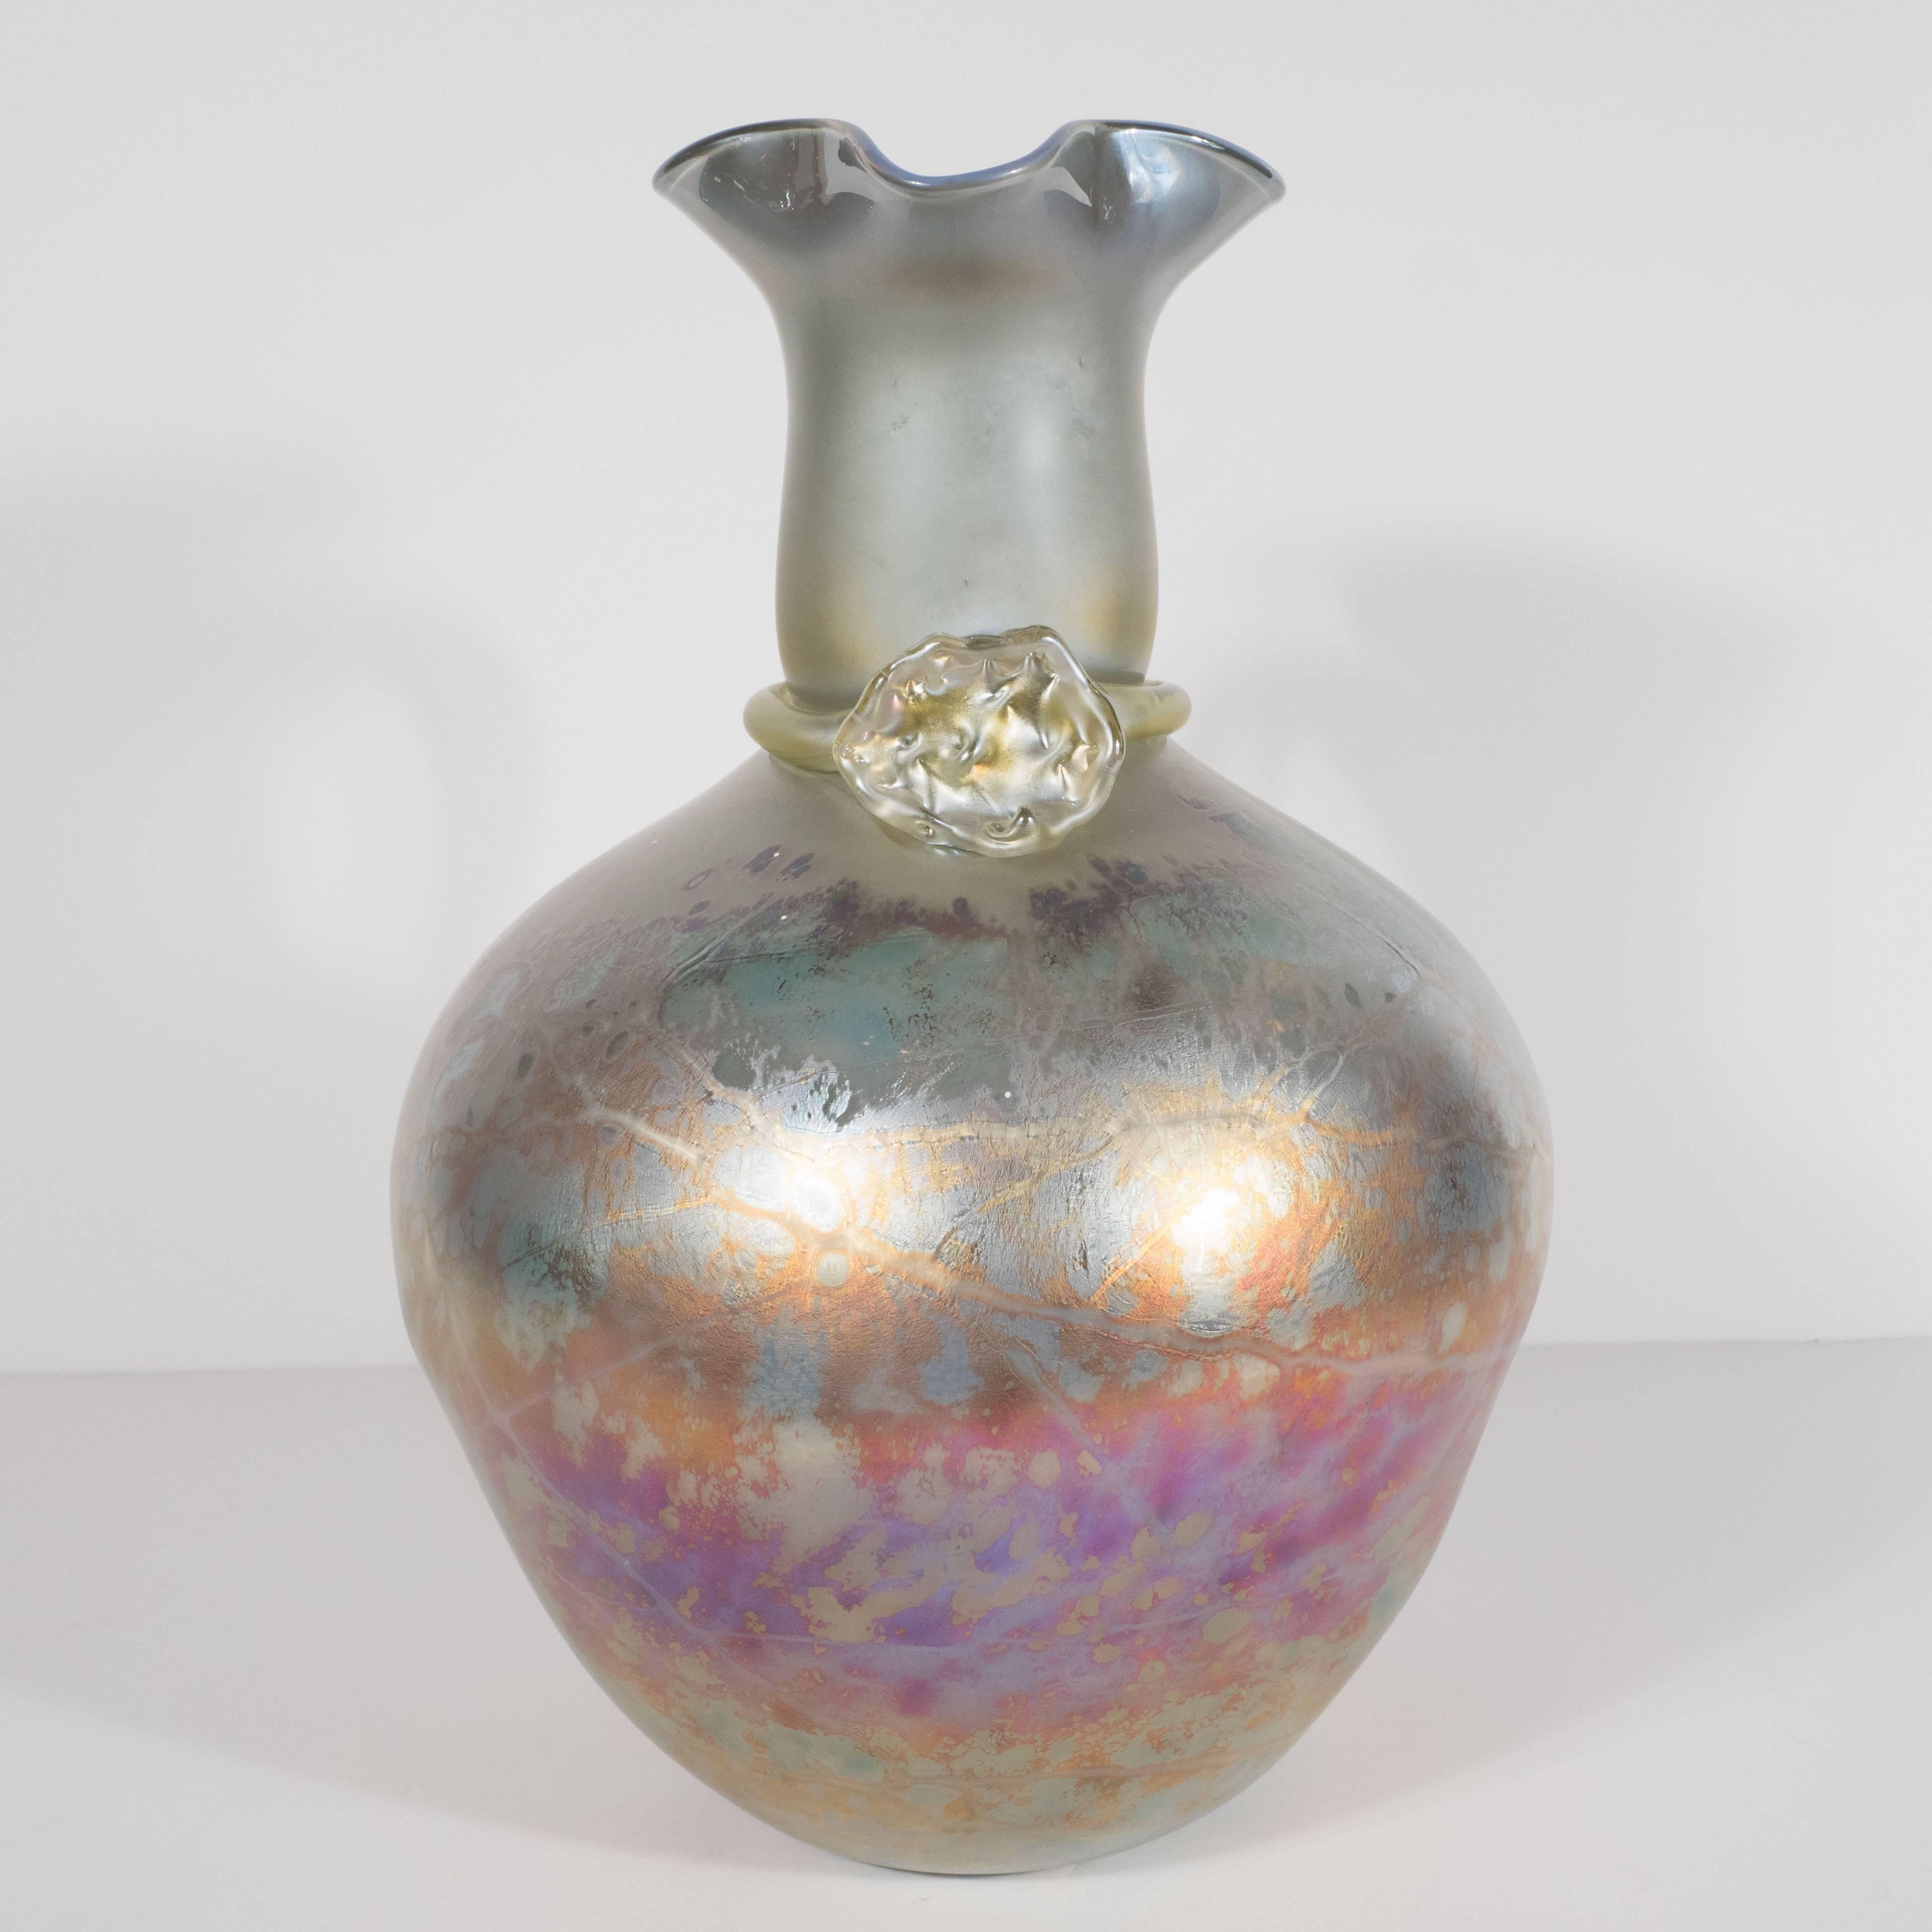 This stunning Etruscan vase was realized in Murano, Italy- the archipelago of Venetian Islands renowned for centuries for their superlative glass production, circa 1980. It was handblown in favrile glass with iridescent tones of coral, gold, and